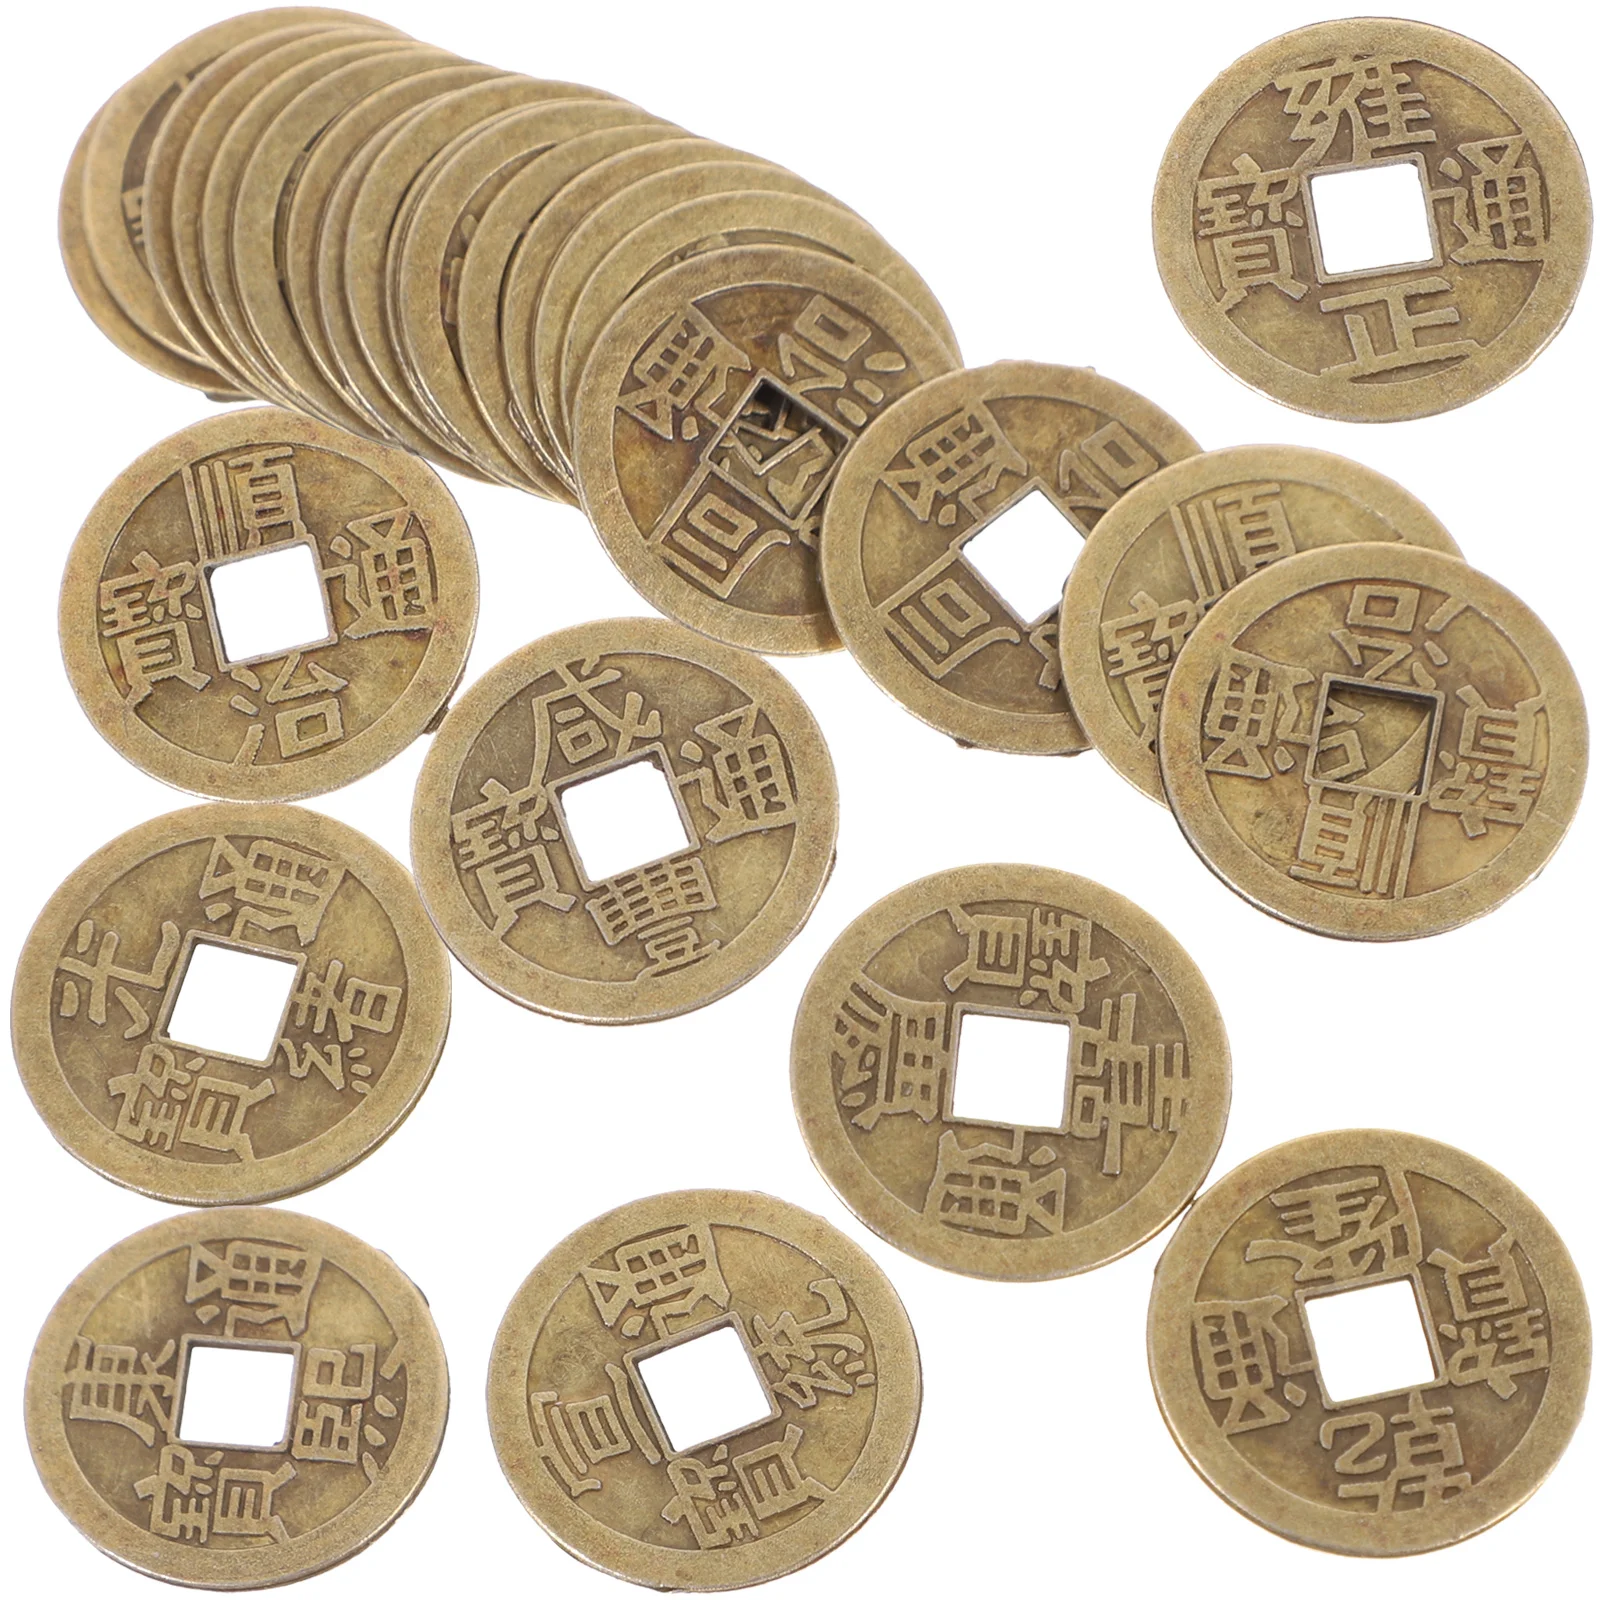 

Chinese Coins Coin Shui Feng Charms Money Chinas Lucky New Gifts Fake Ancient Knot Ching I Copper Toy Accessory Gadgets Year